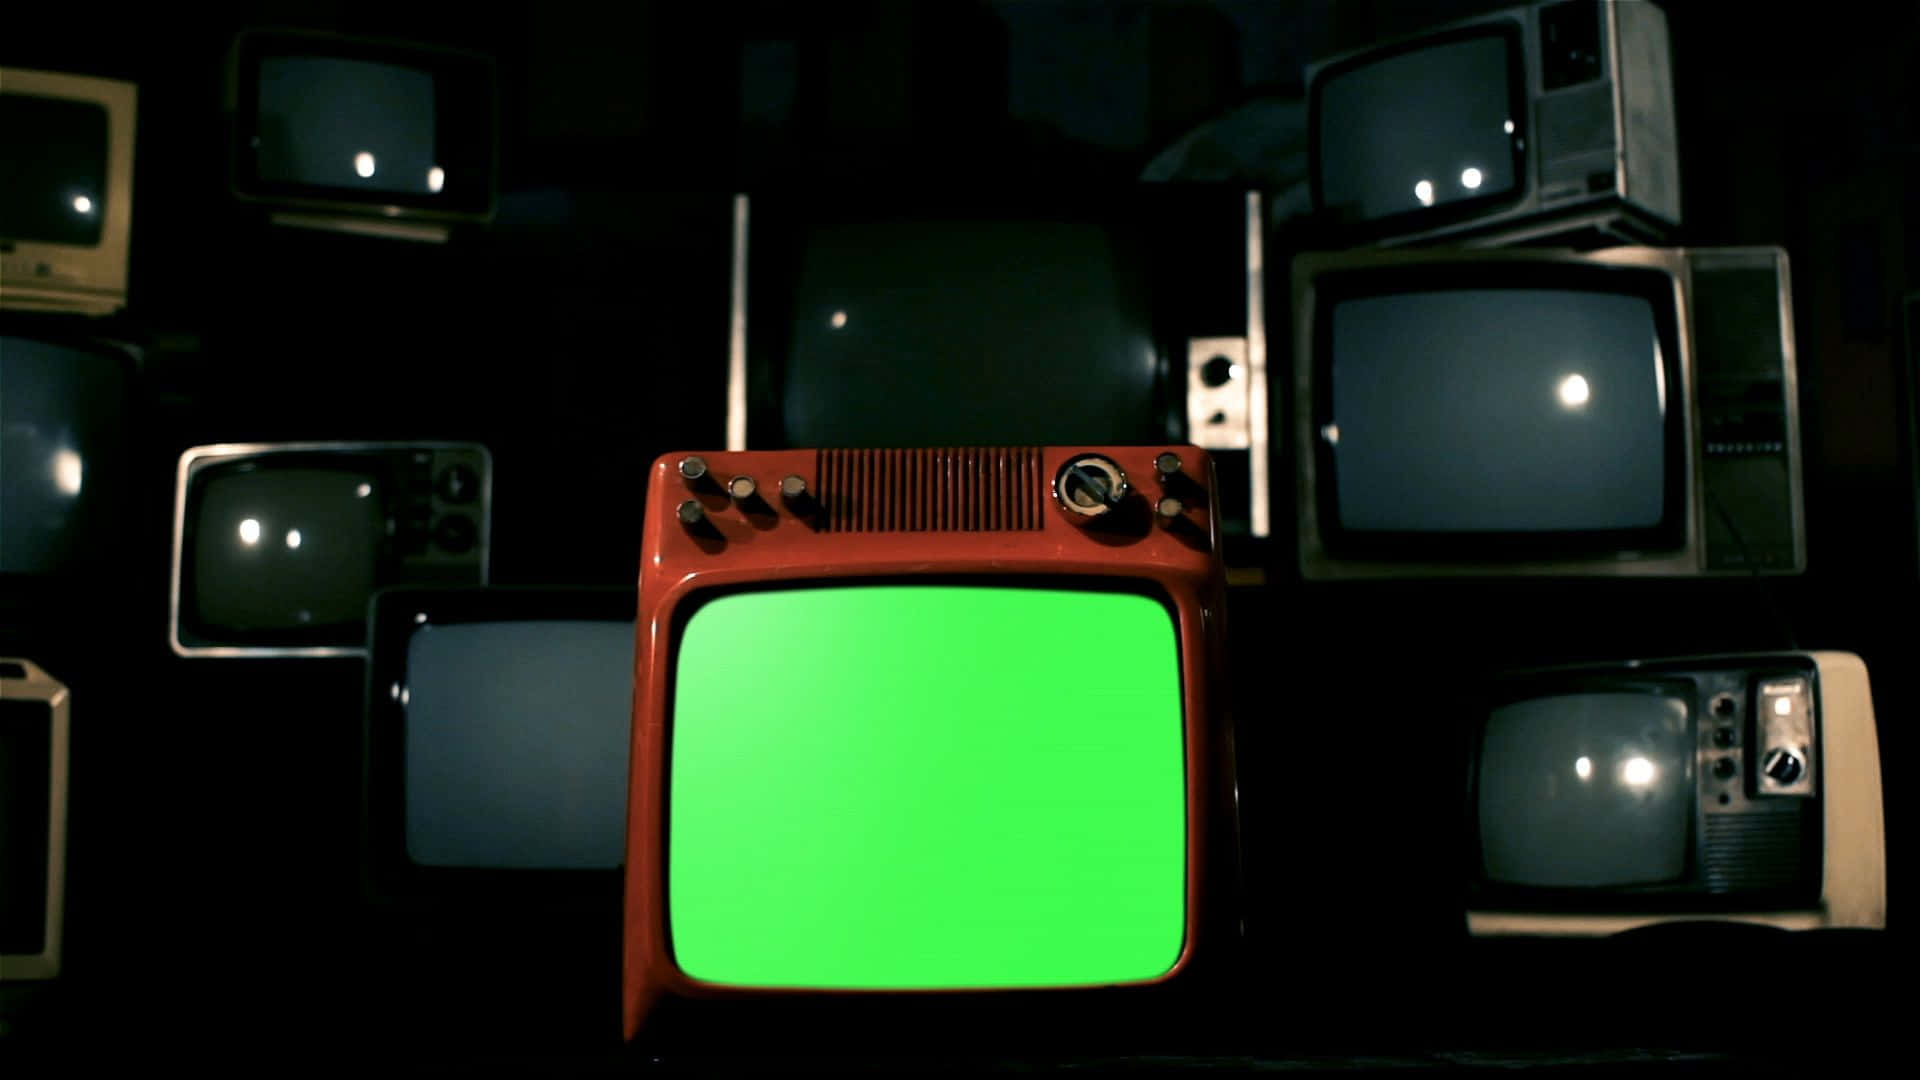 A Group Of Televisions With Green Screens